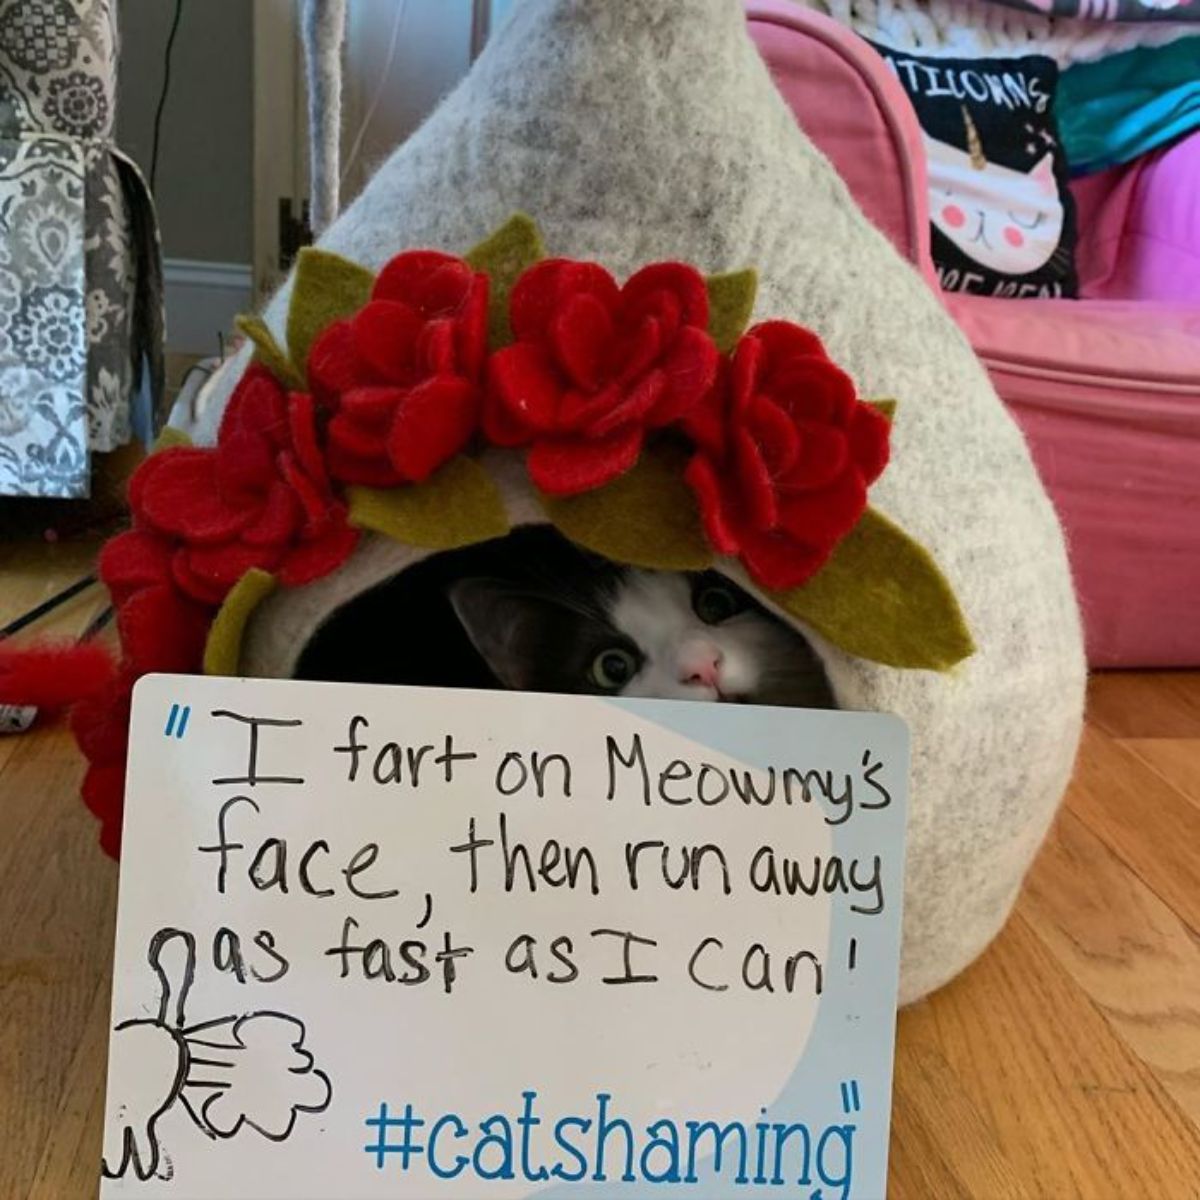 black and white cat peeking out of a white covered cat bed with red roses on the front with a note saying the cat farts on her mother's face and runs away